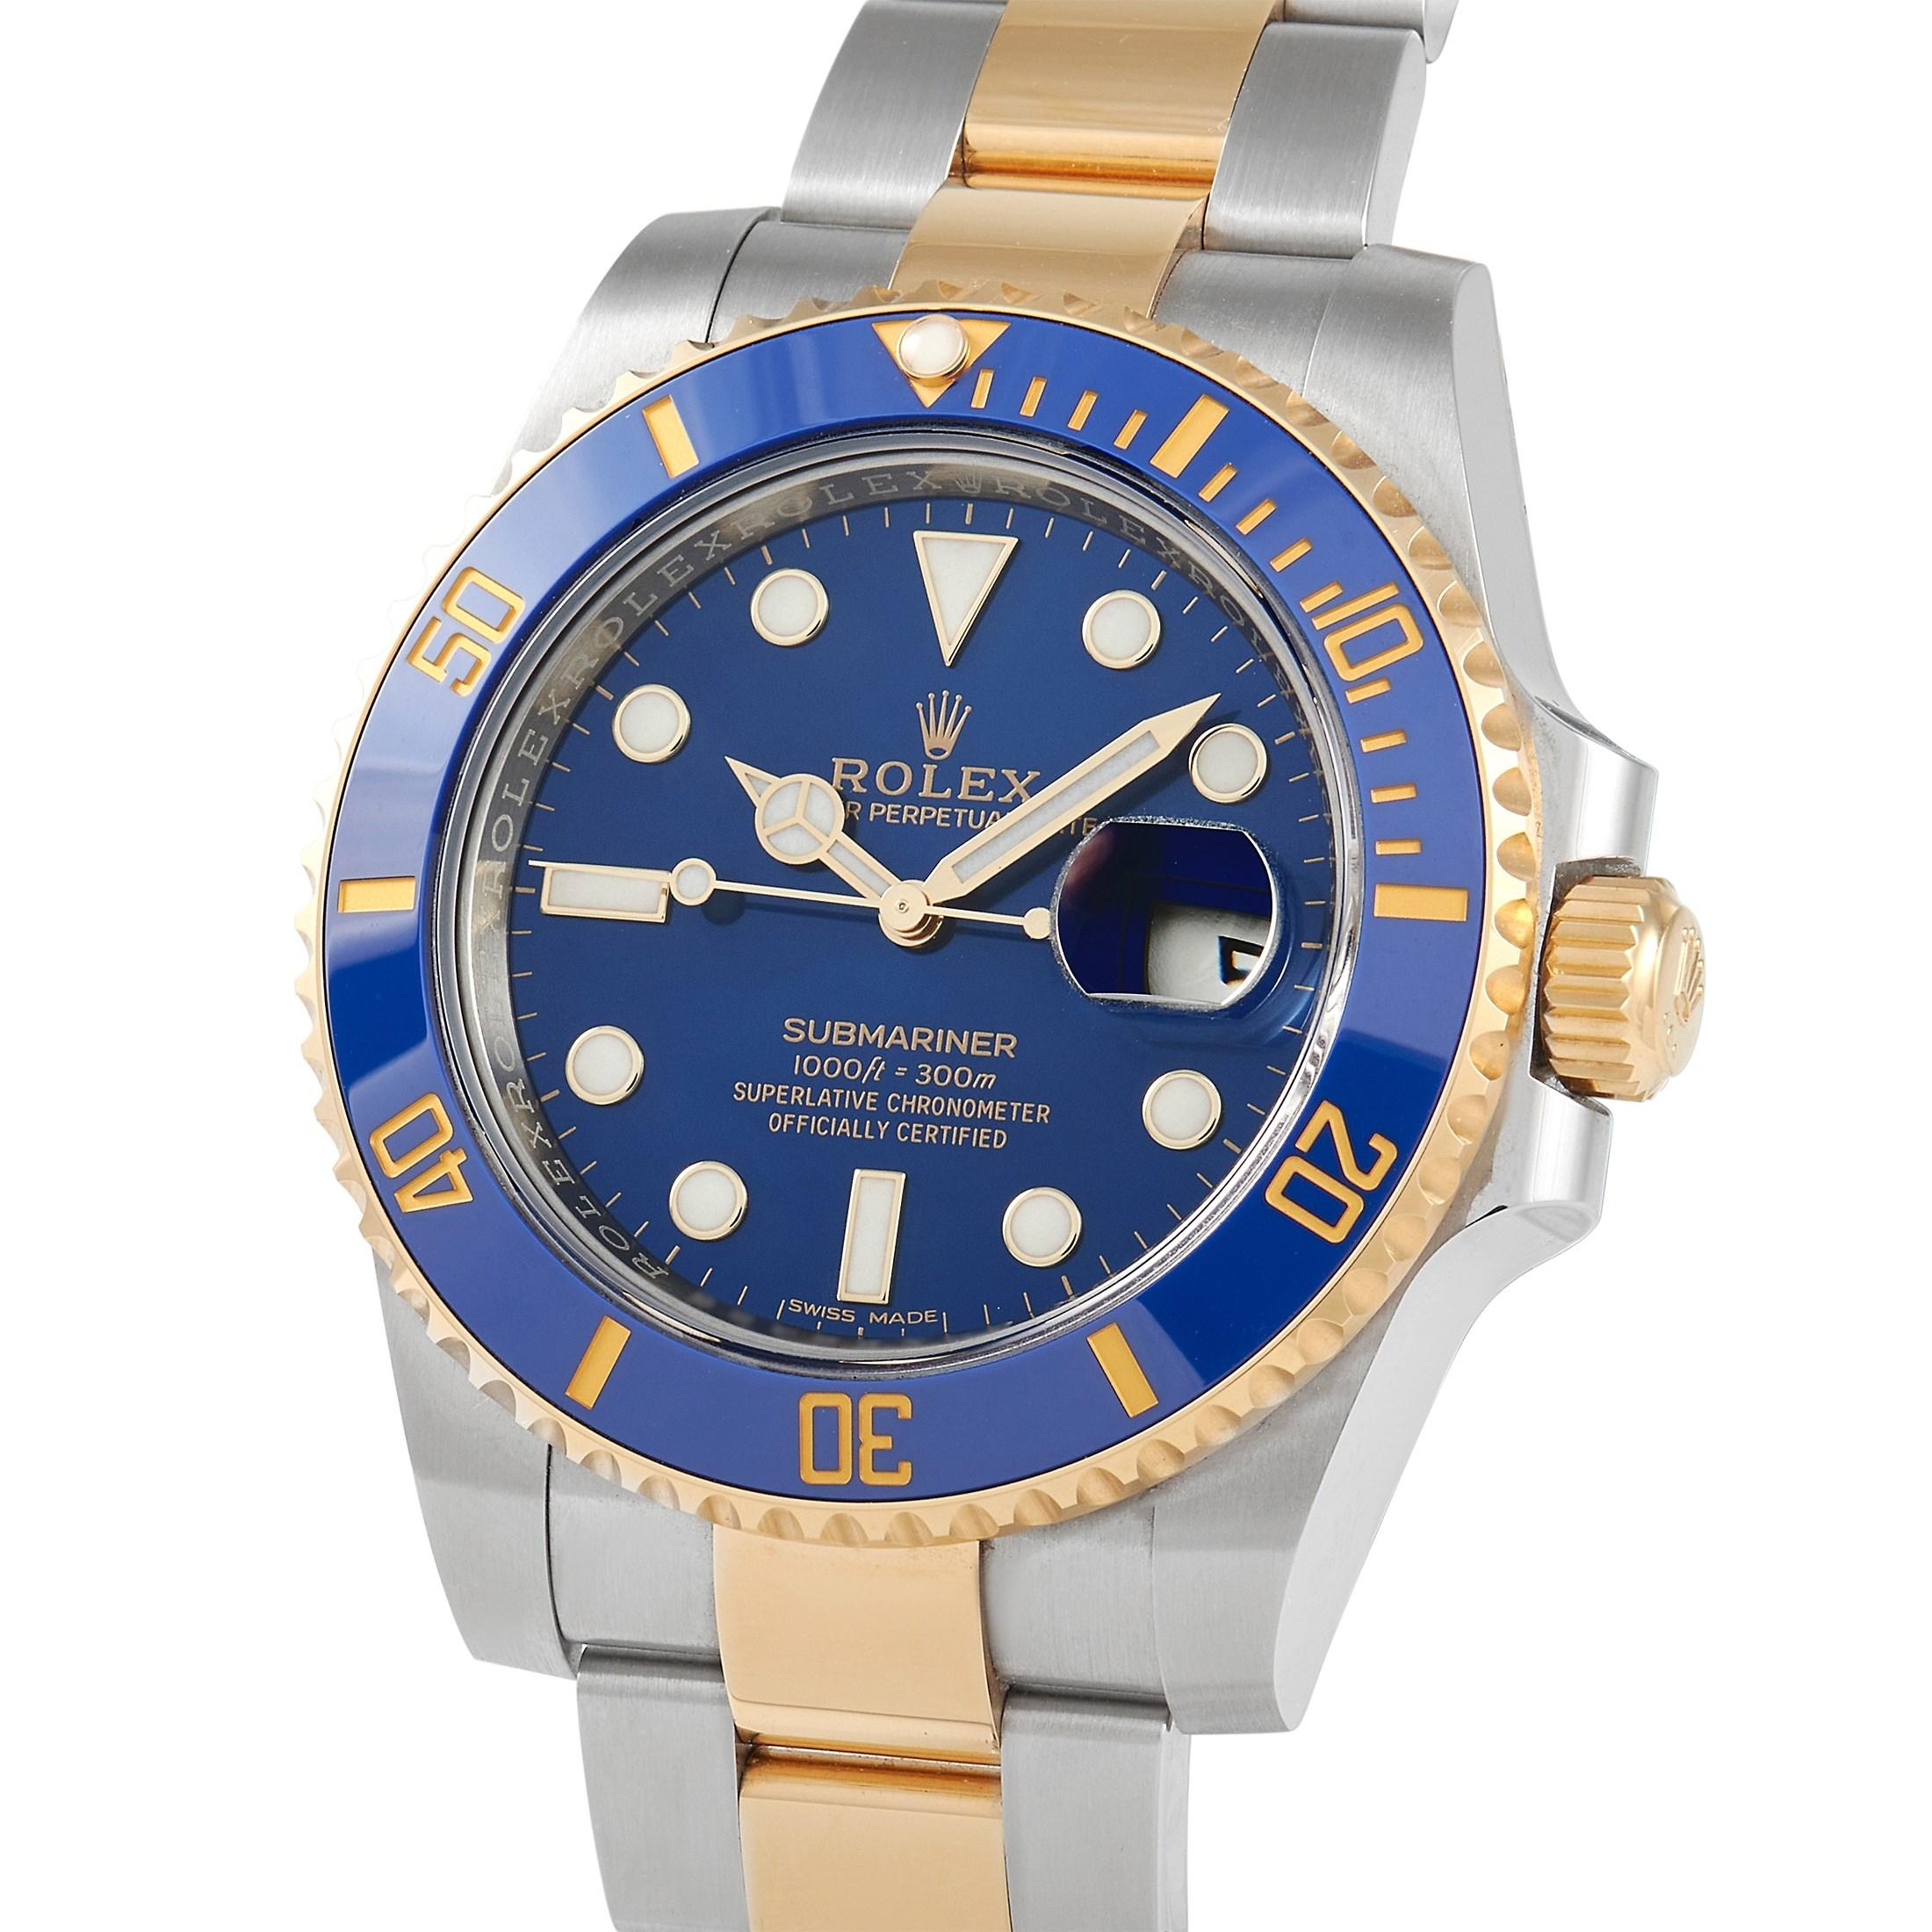 This Rolex Submariner Oyster Perpetual Datejust 40 mm Watch, reference number 116613LB, features an oystersteel case measuring 40 mm in diameter and includes a bright blue and gold rotating fluted bezel. It is presented on a matching white and